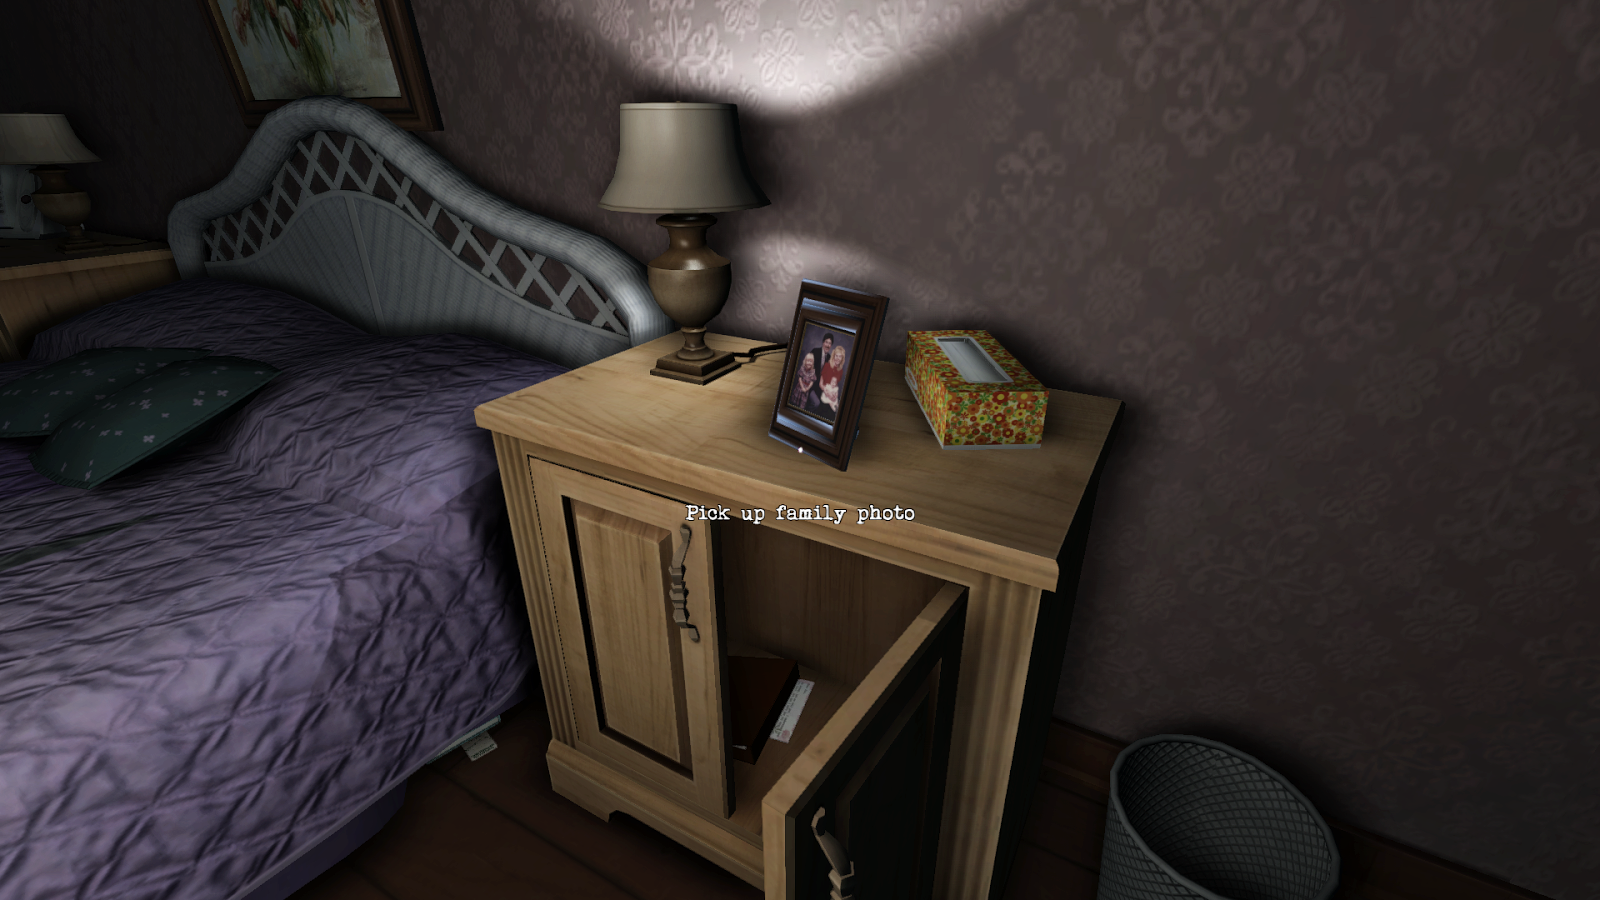 Go home game. Gone Home игра. Gone Home ps4. Gone Home геймплей.